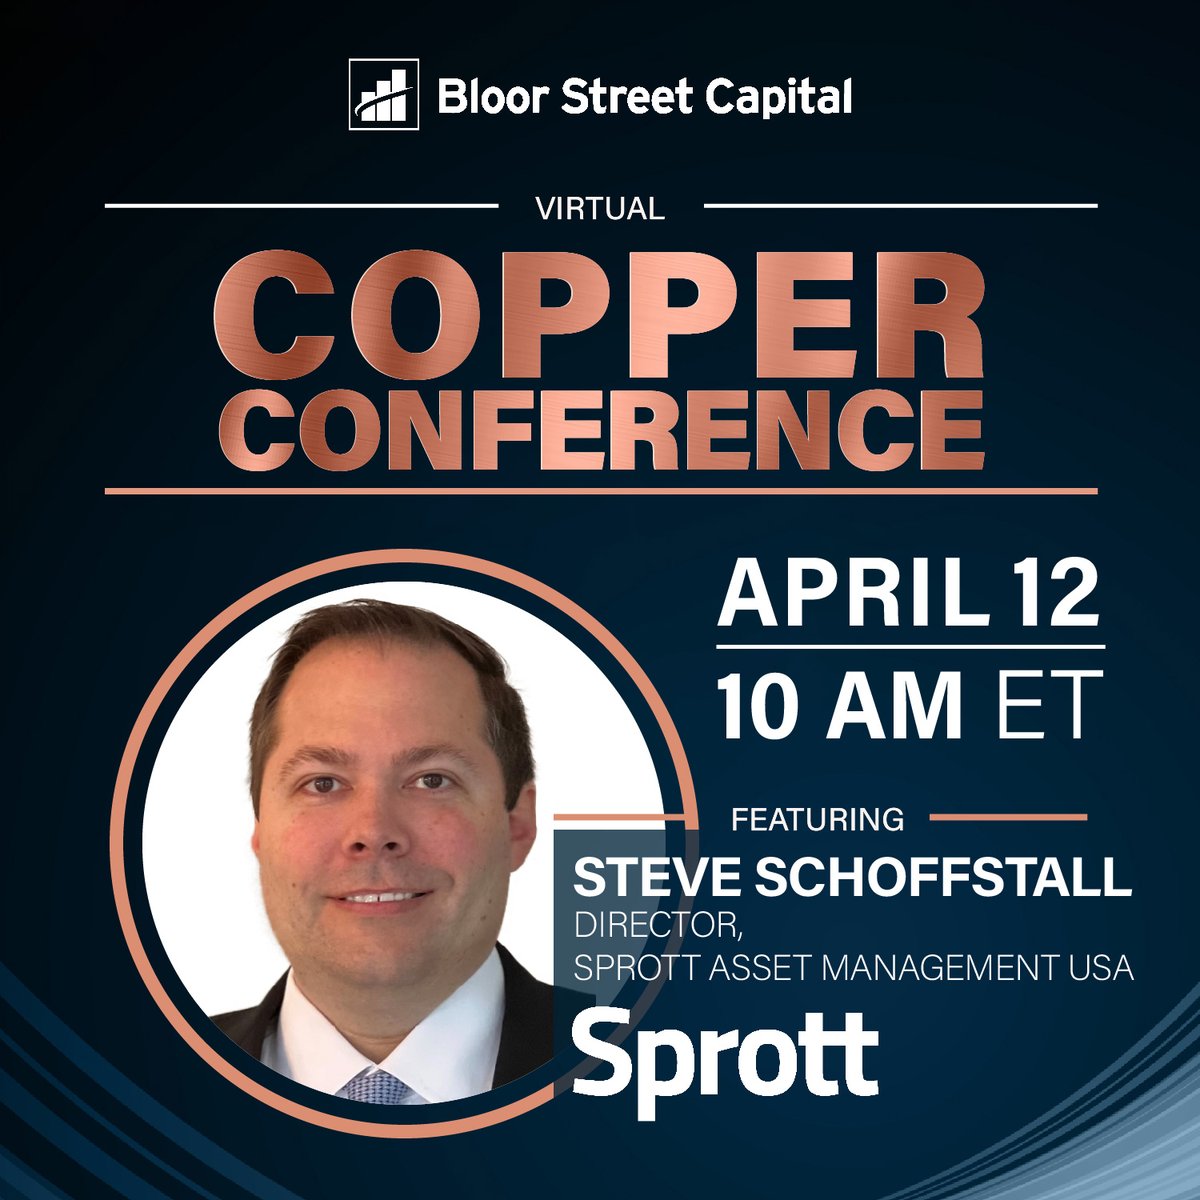 Join Steve Schoffstall of @sprott as he provides an overview of Sprott's newest #copper ETF. Register at bit.ly/3VQrrje